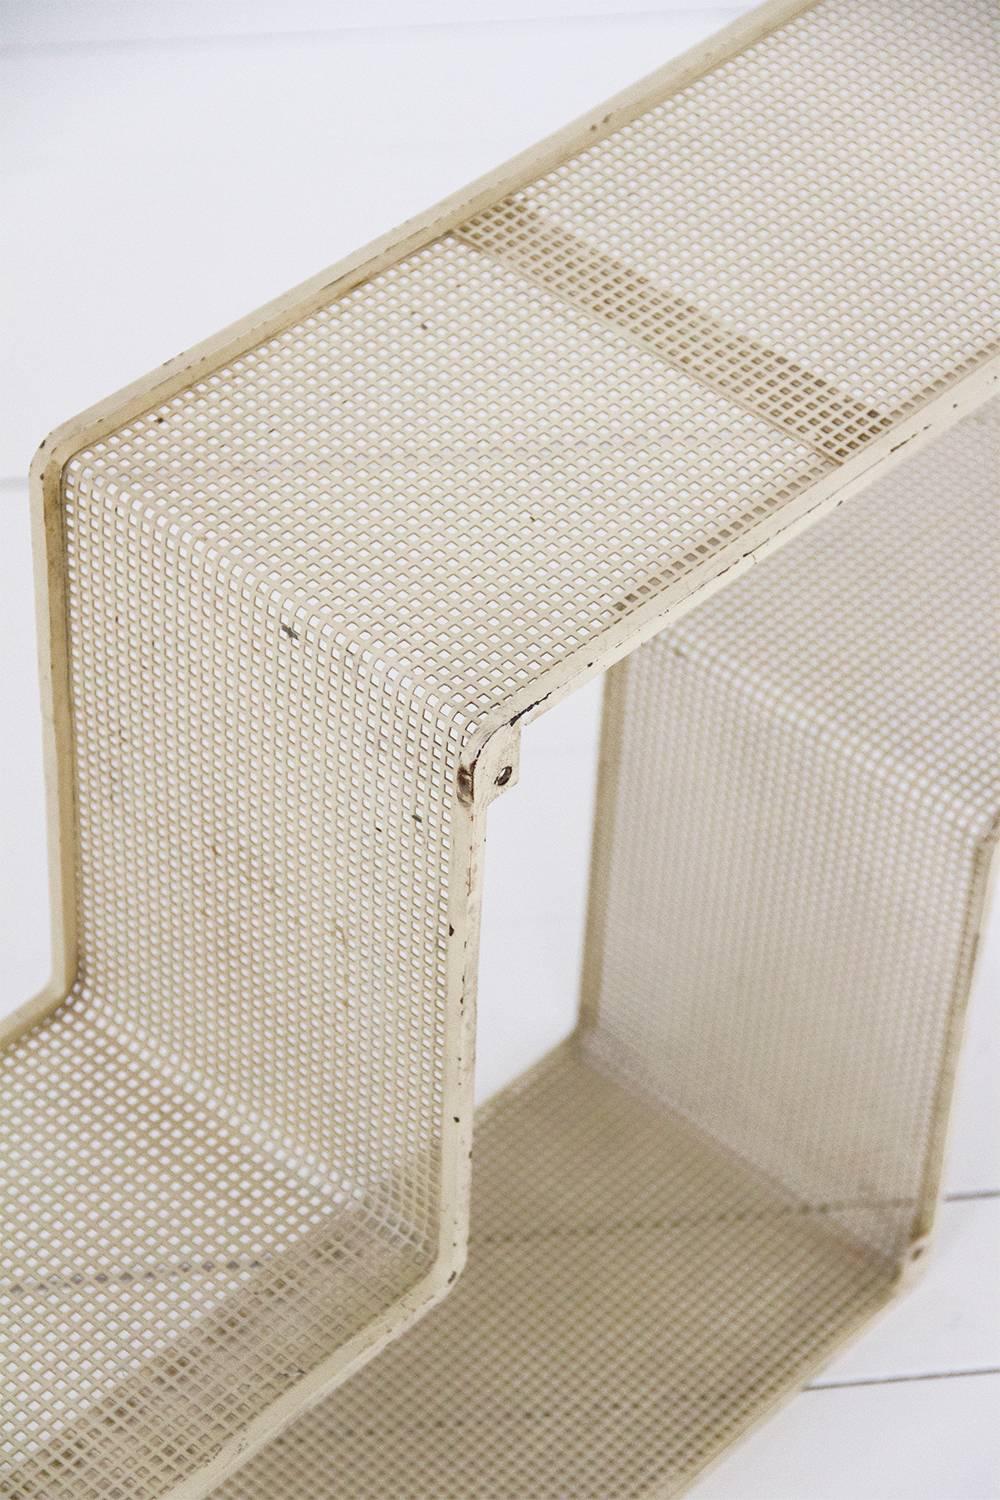 Dedal Wall Shelf by Mathieu Mategot, Perforated Steel, France, circa 1950 In Good Condition For Sale In Barcelona, ES